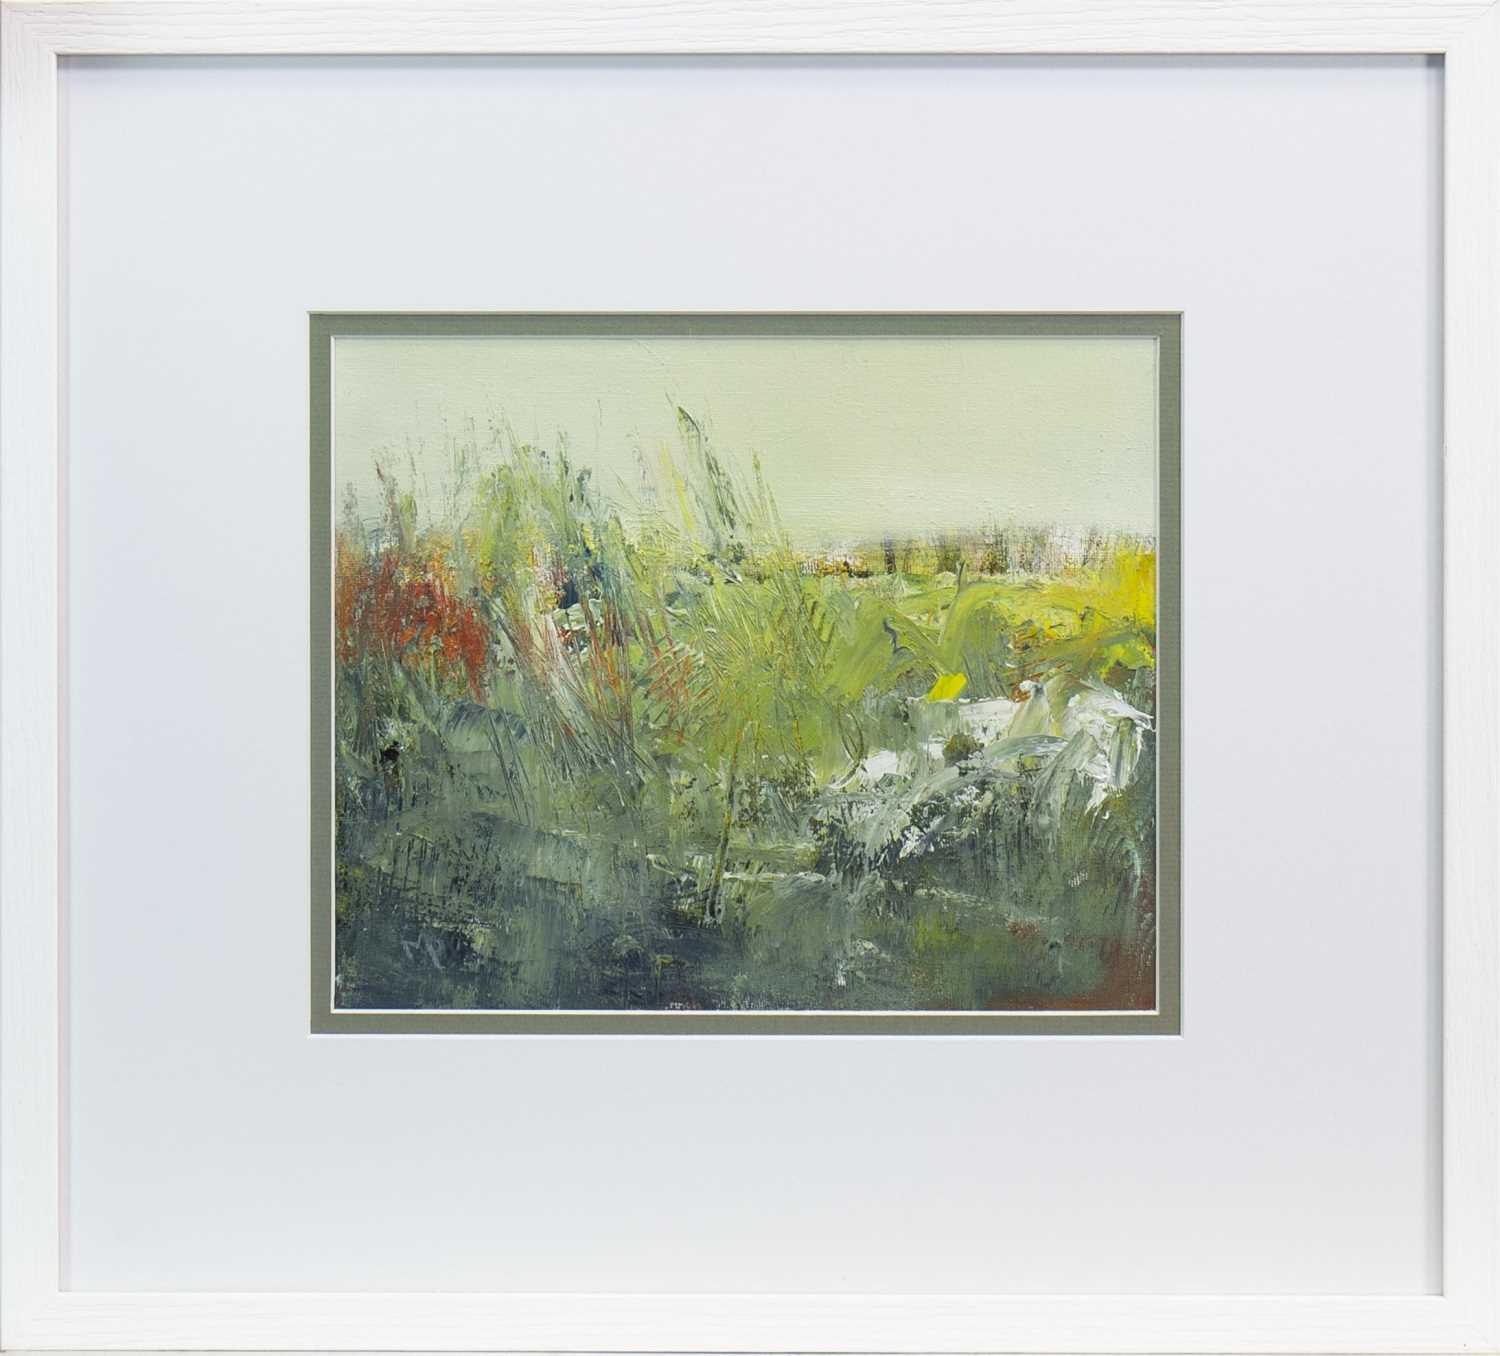 Lot 694 - AUTUMN GRASSES, A MIXED MEDIA BY MAY BYRNE